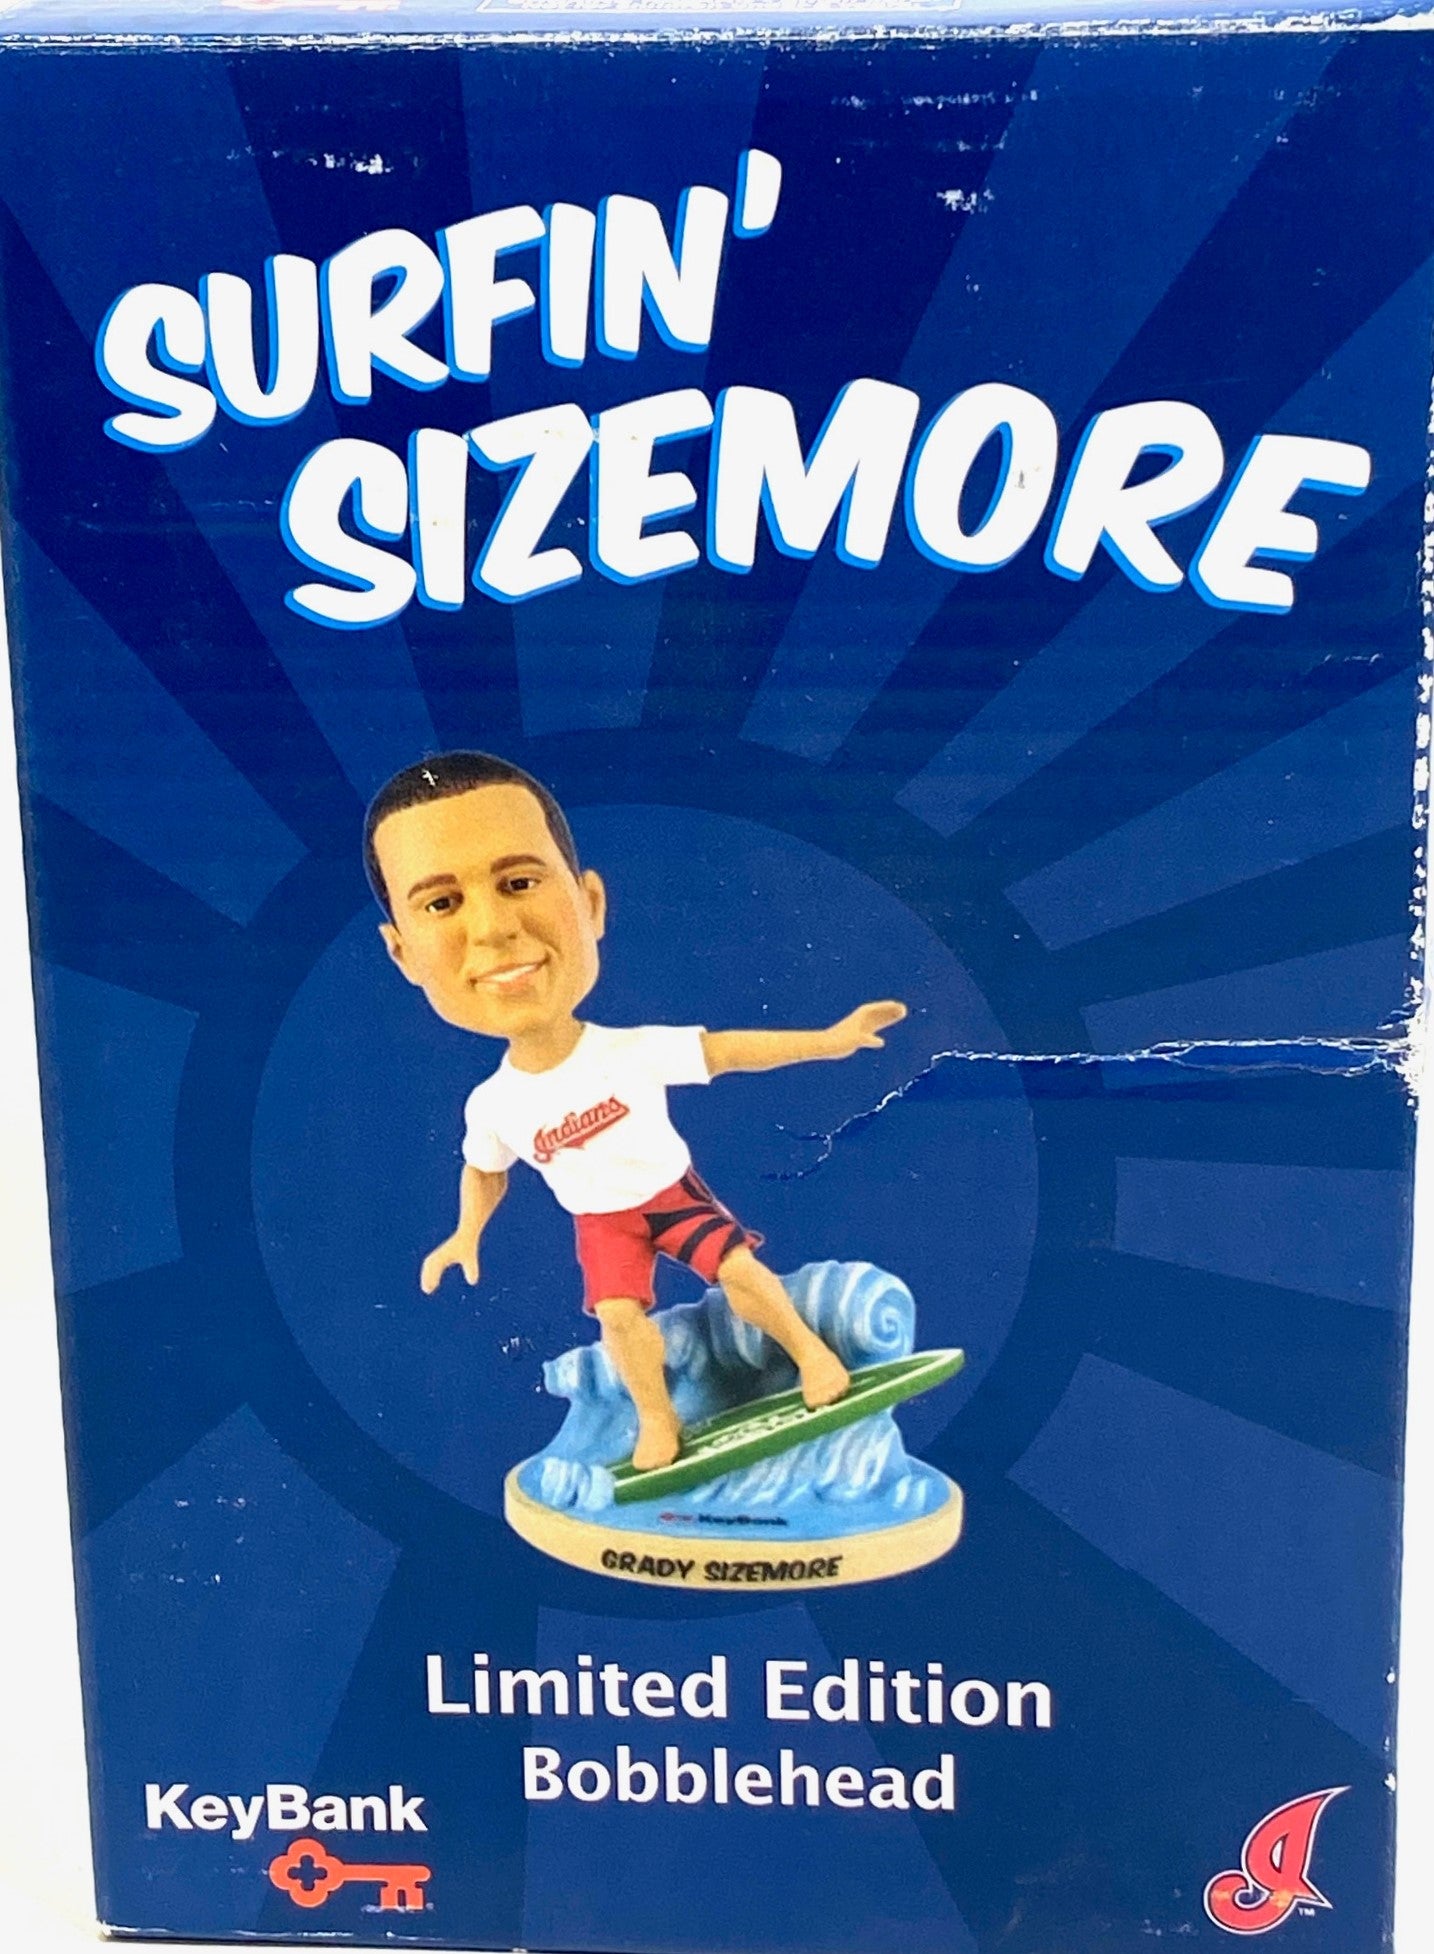 Grady "Surfin" Sizemore 2009 MLB Cleveland Indians Mini-Bobblehead Used By BD&A